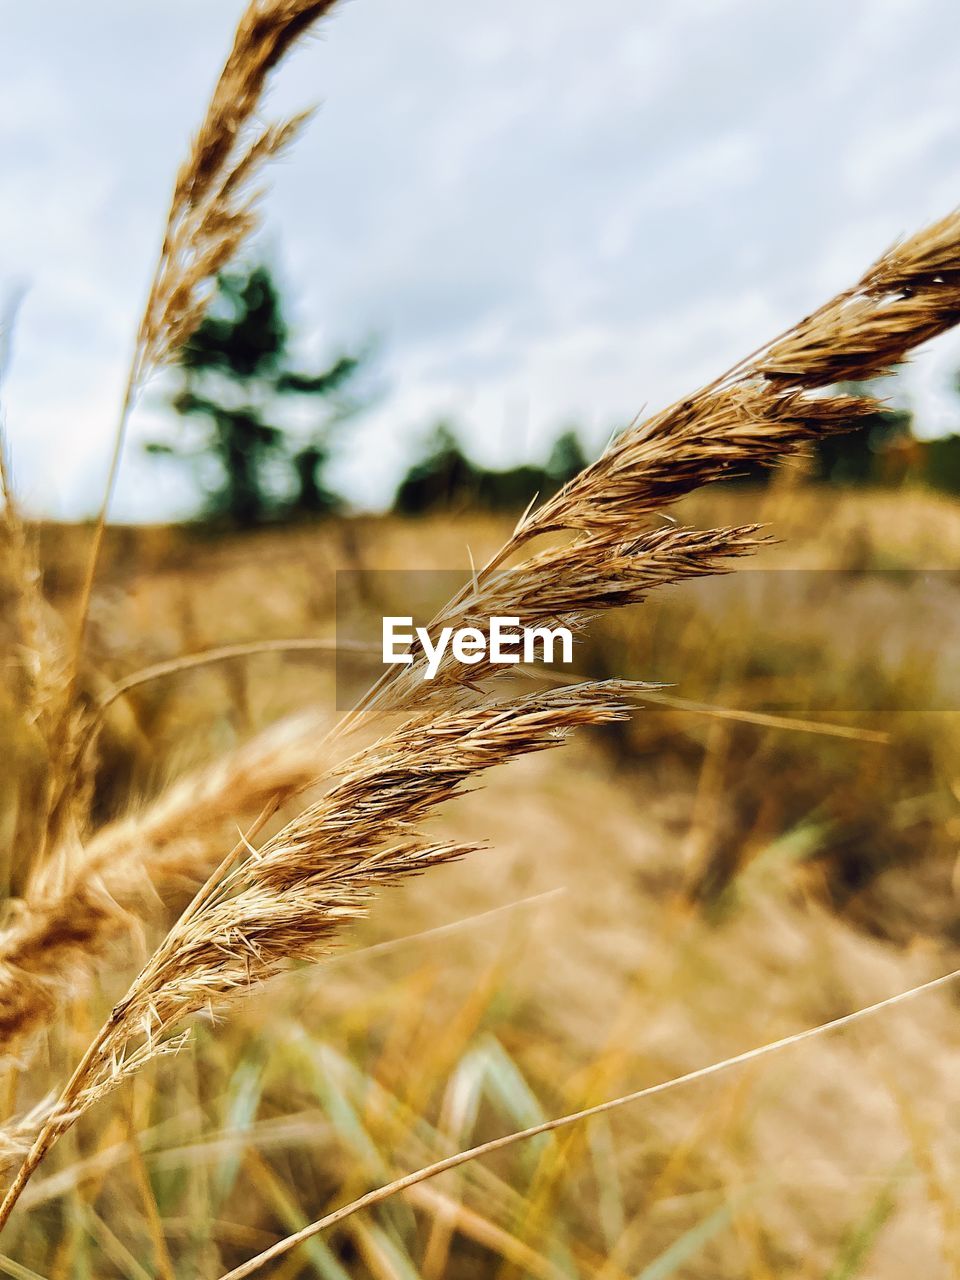 plant, agriculture, cereal plant, crop, food, field, rural scene, landscape, nature, sky, grass, wheat, land, growth, barley, environment, food grain, close-up, farm, beauty in nature, summer, no people, cloud, gold, outdoors, sunlight, food and drink, rye, selective focus, scenics - nature, focus on foreground, tranquility, day, whole grain, plant stem, harvesting, non-urban scene, brown, organic, autumn